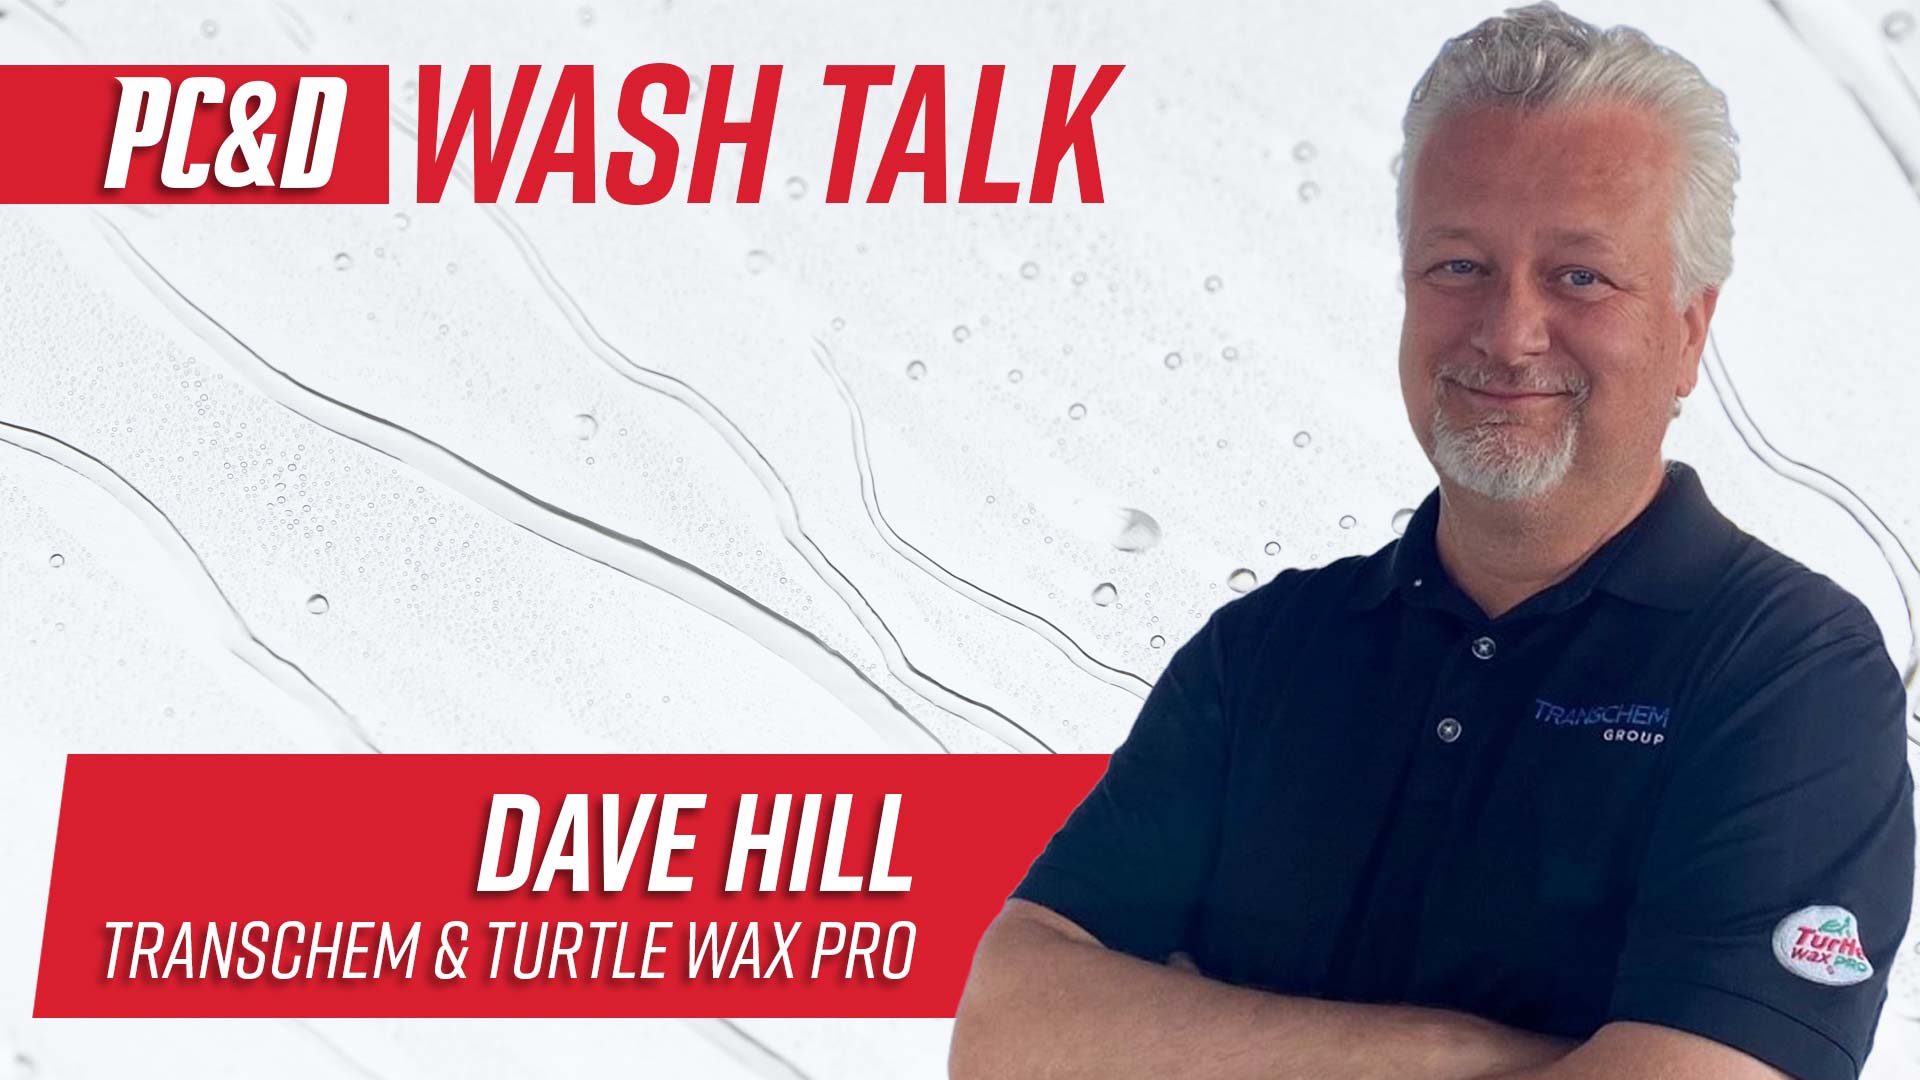 Dave Hill, operations support and development manager for Transchem and Turtle Wax Pro